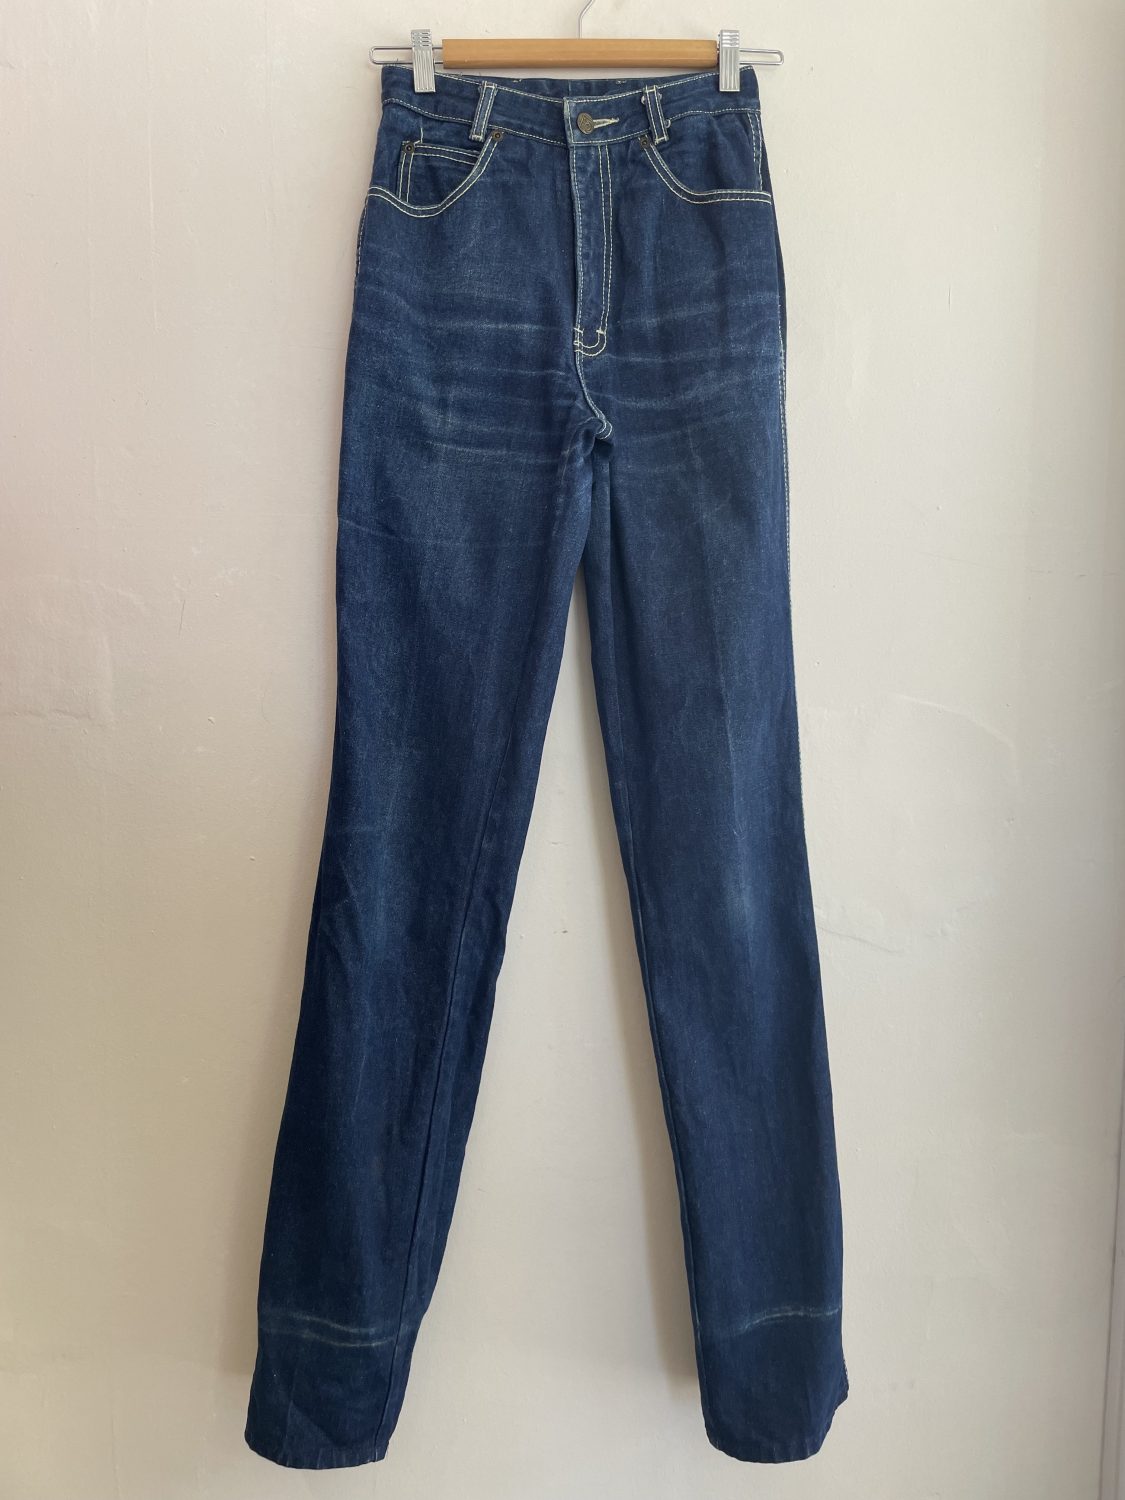 80's 'BON-JOUR' HIGH-WAISTED JEANS WITH EMBROIDERED BACK POCKETS ...